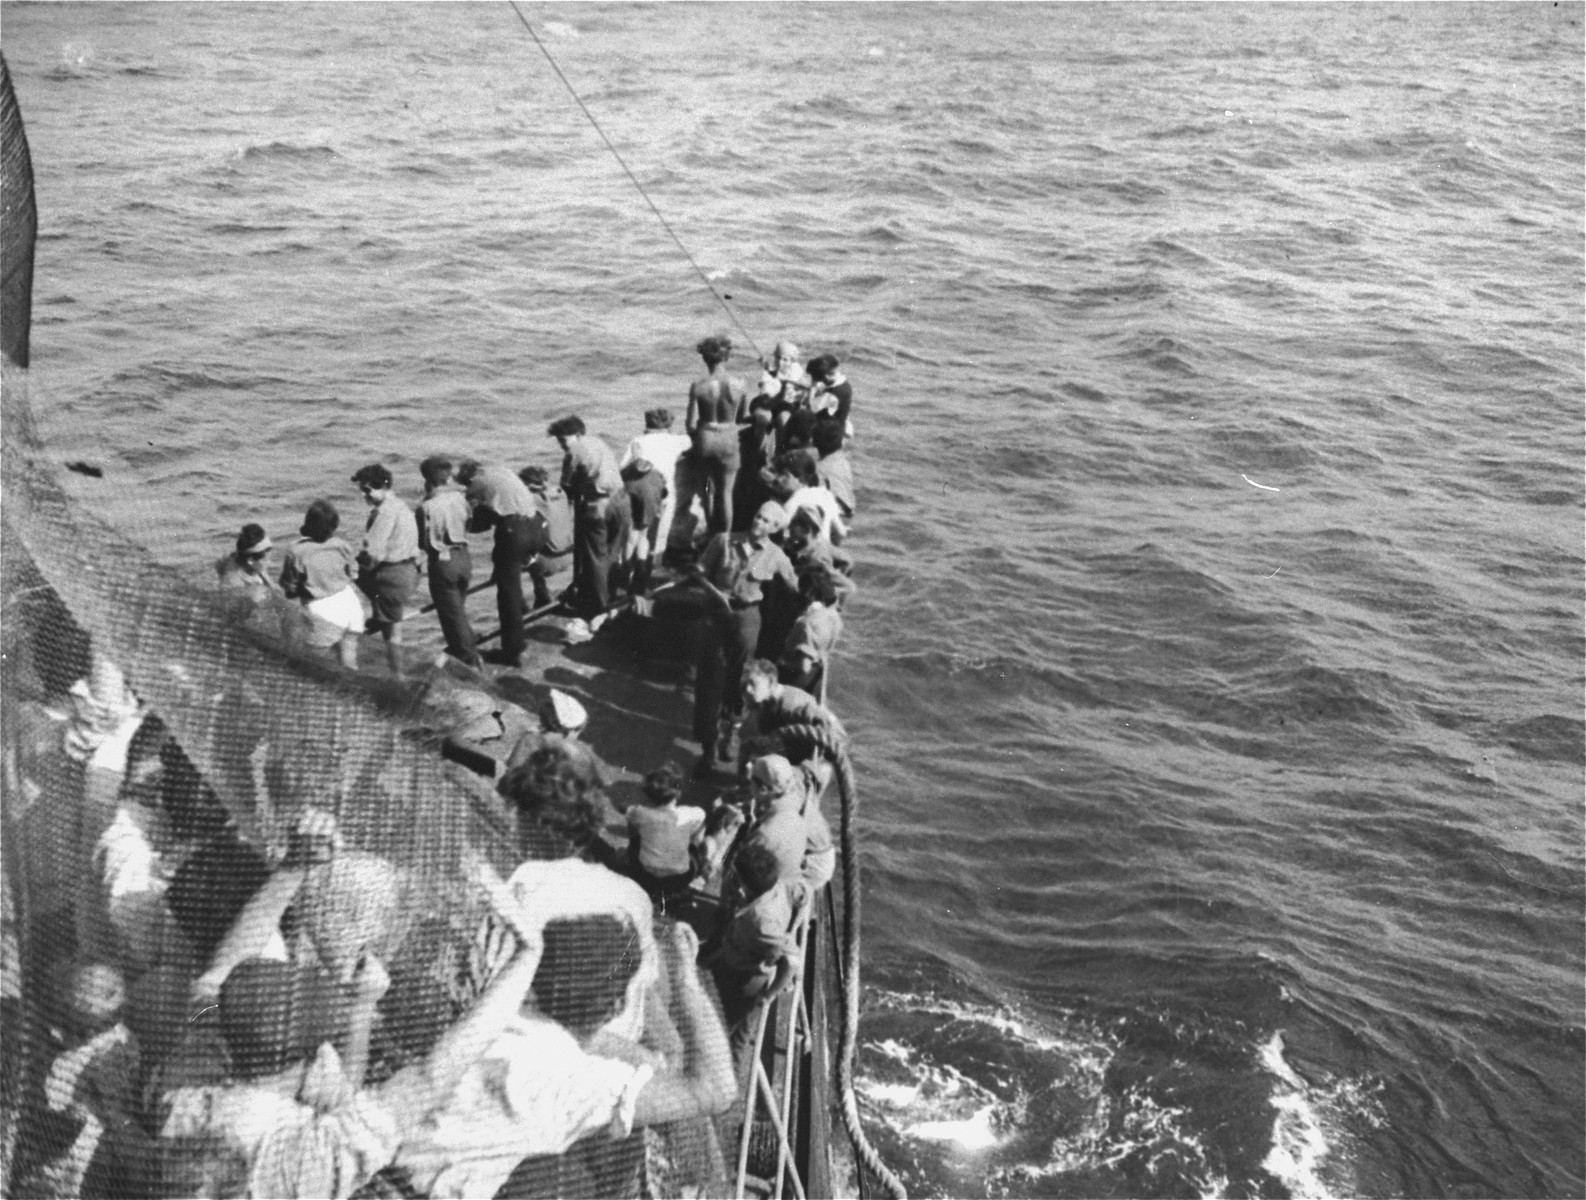 Jewish passengers crowd the bow of the Exodus 1947 as it is towed into the port of Haifa.